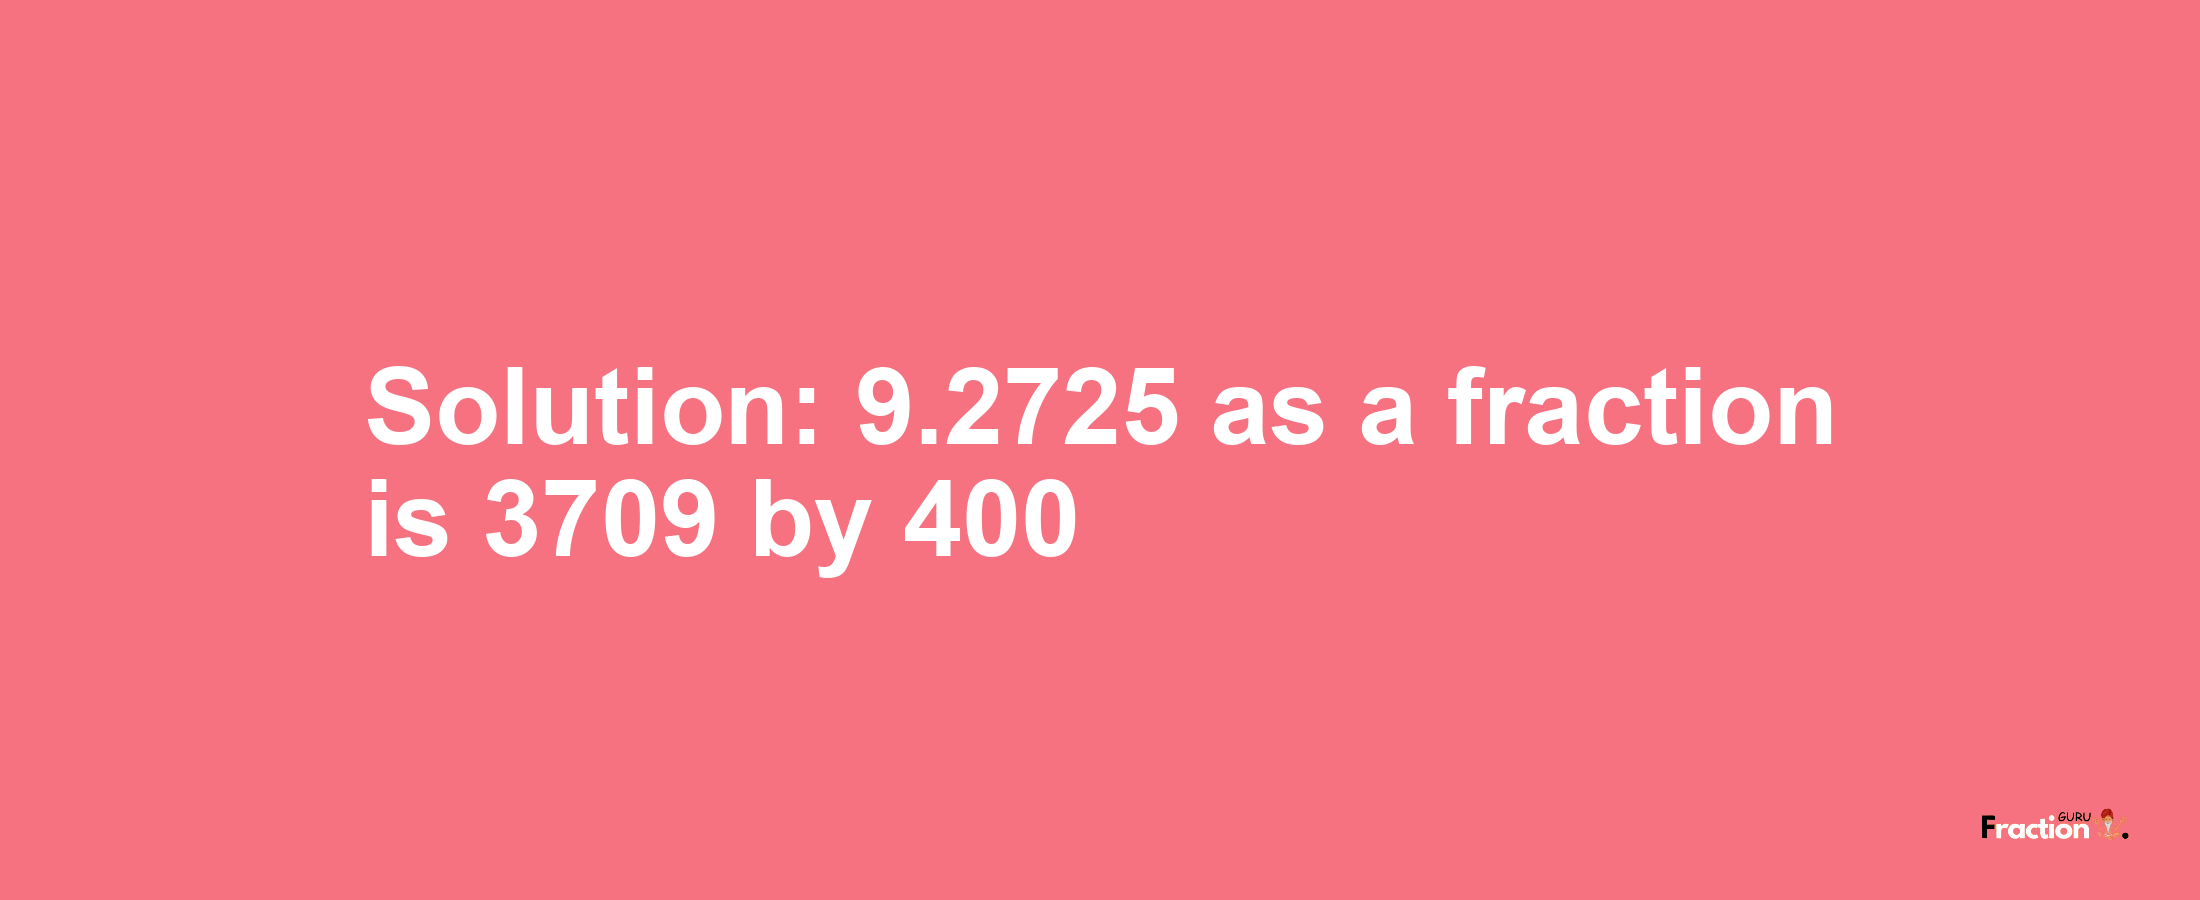 Solution:9.2725 as a fraction is 3709/400